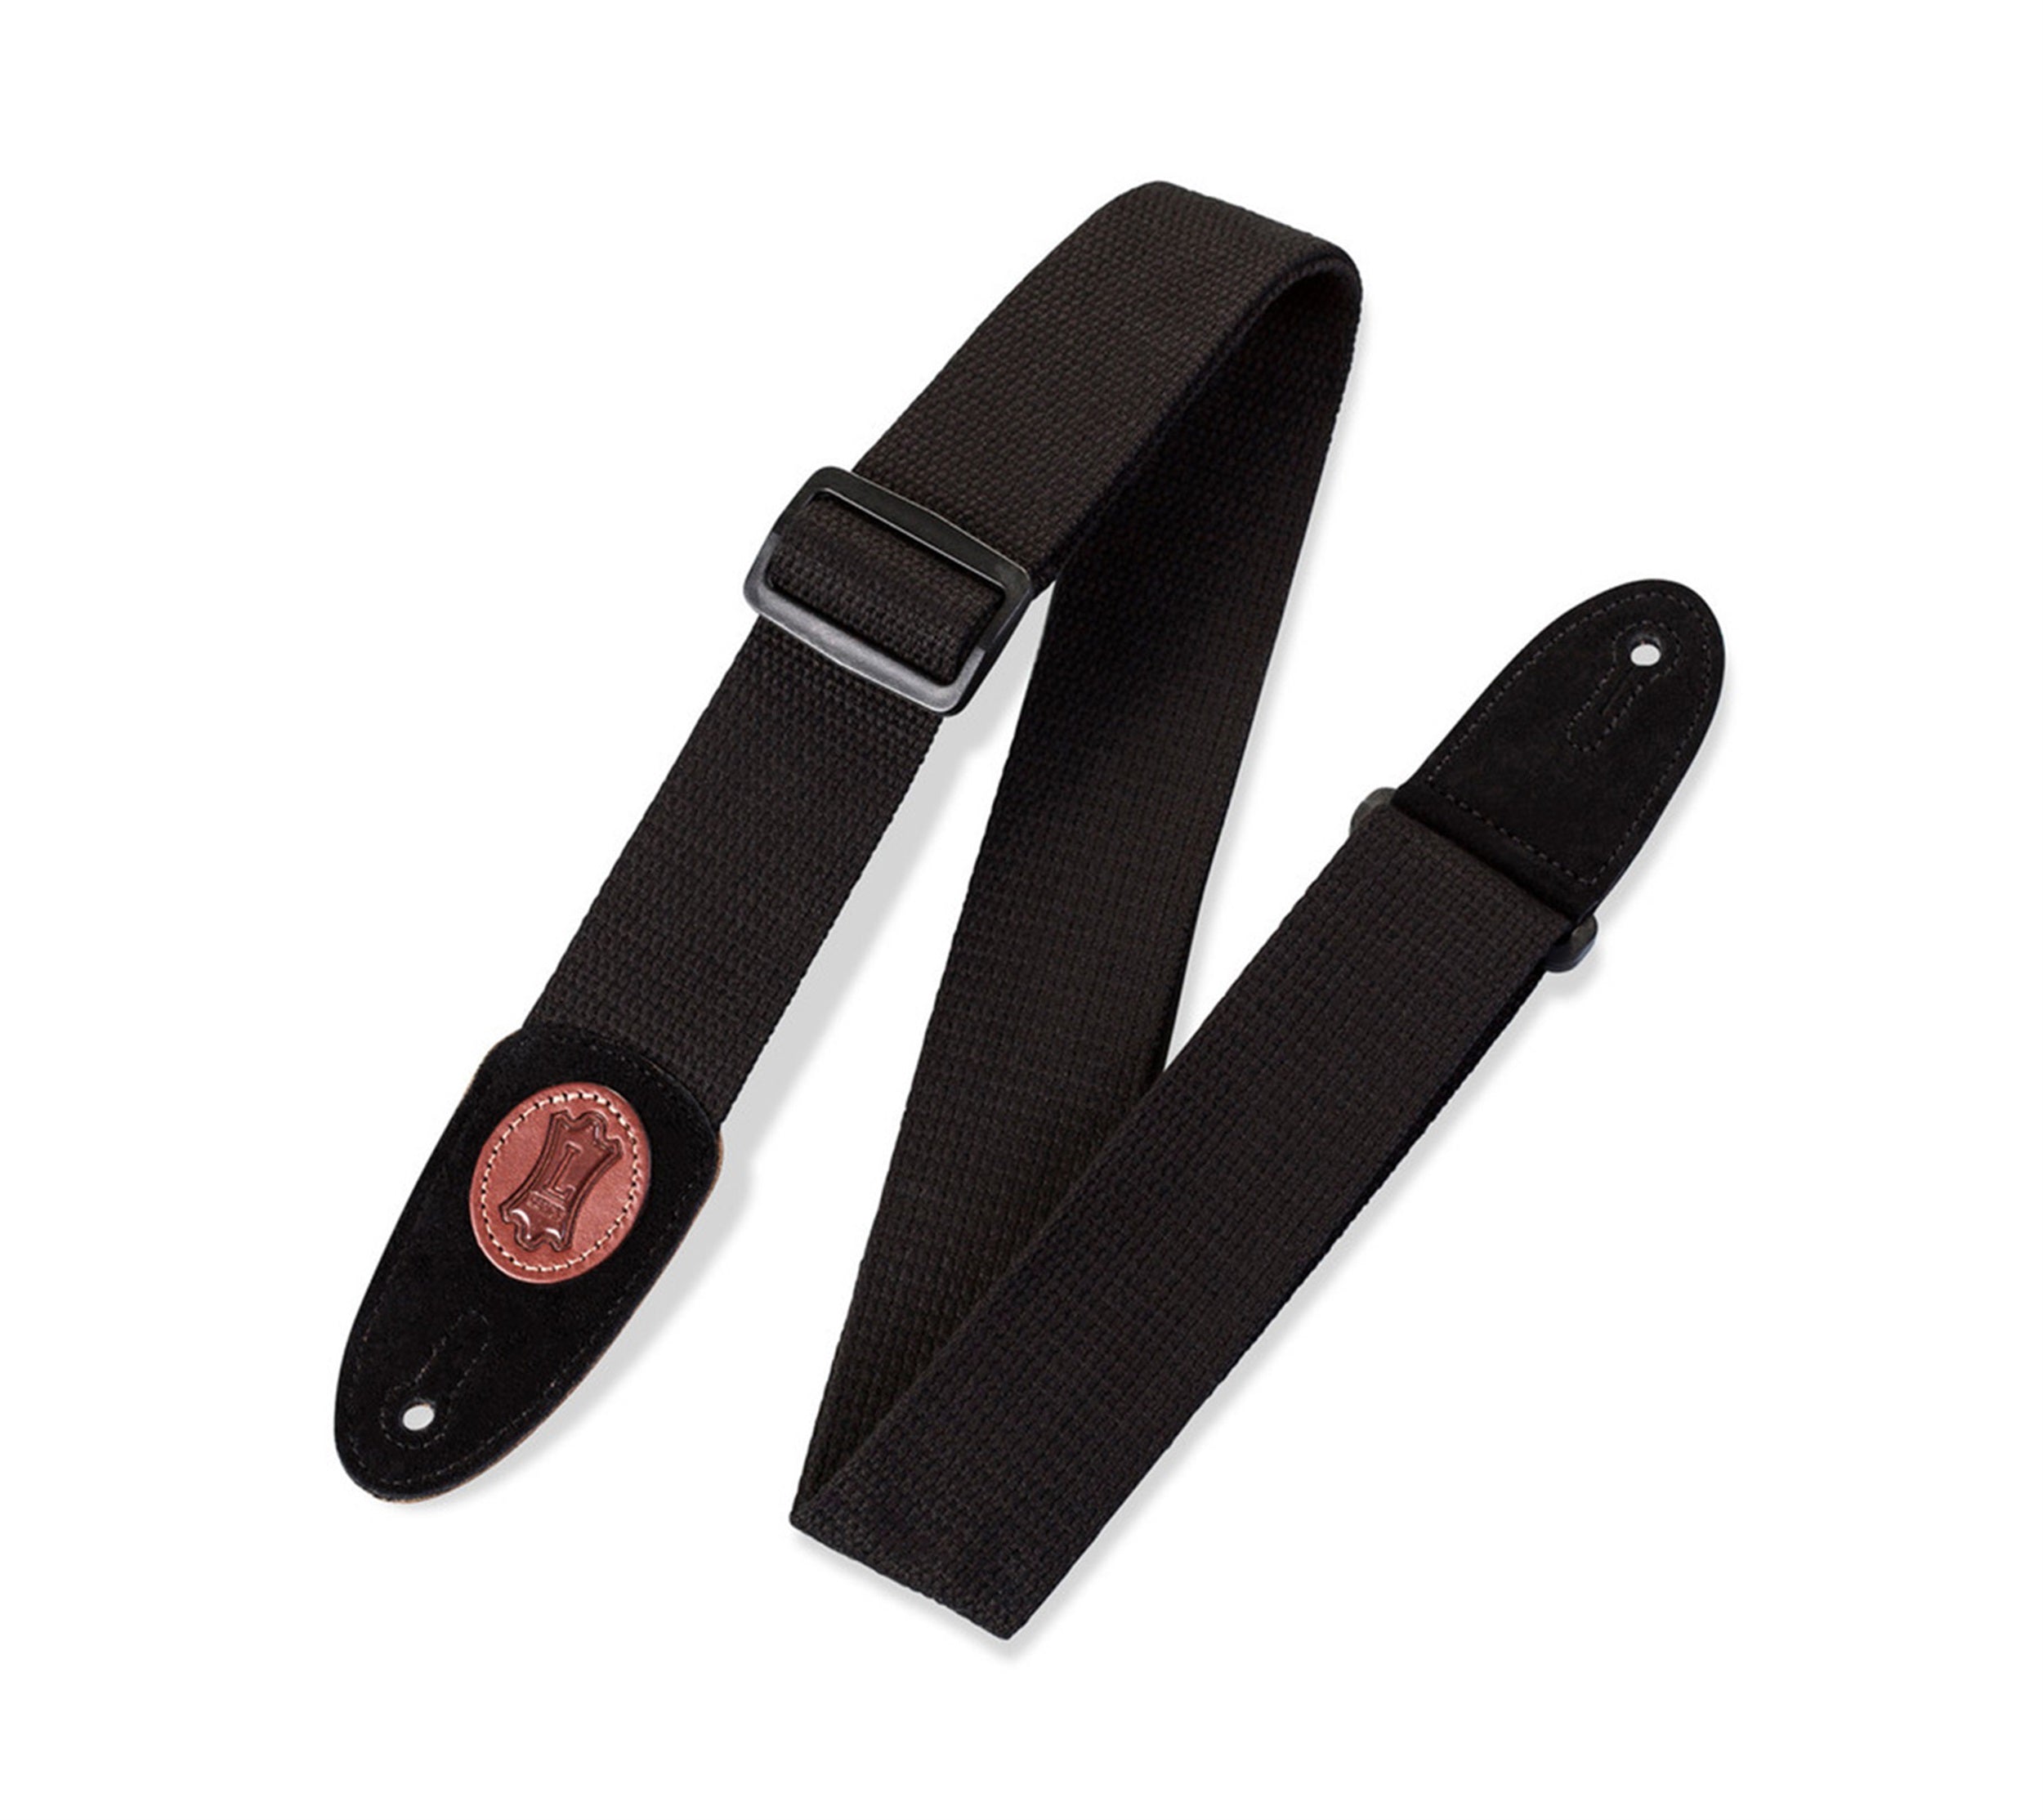 Levy's Leathers MSSC8-XL-BLK, 2-Inch Wide Black Cotton Guitar Strap - Hollywood DJ